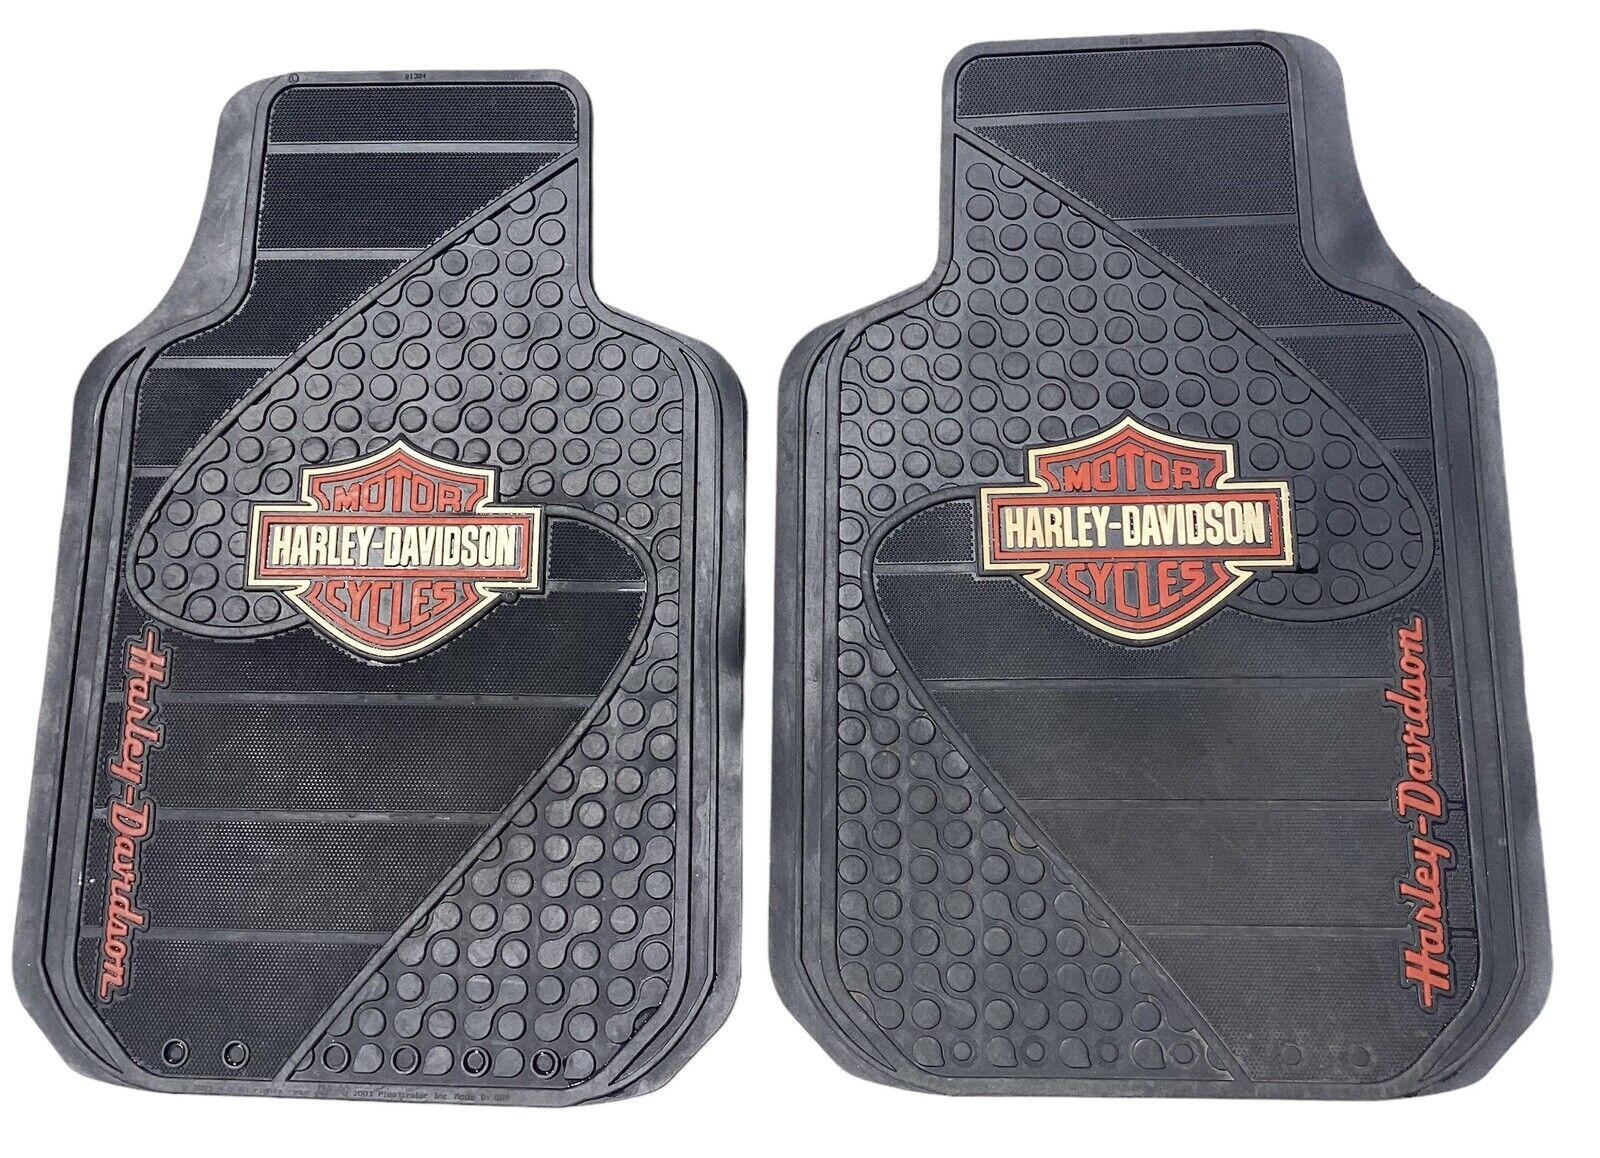 Harley Davidson Floor Mats Front Pair 2003 Plasticolor Made in USA Automobile